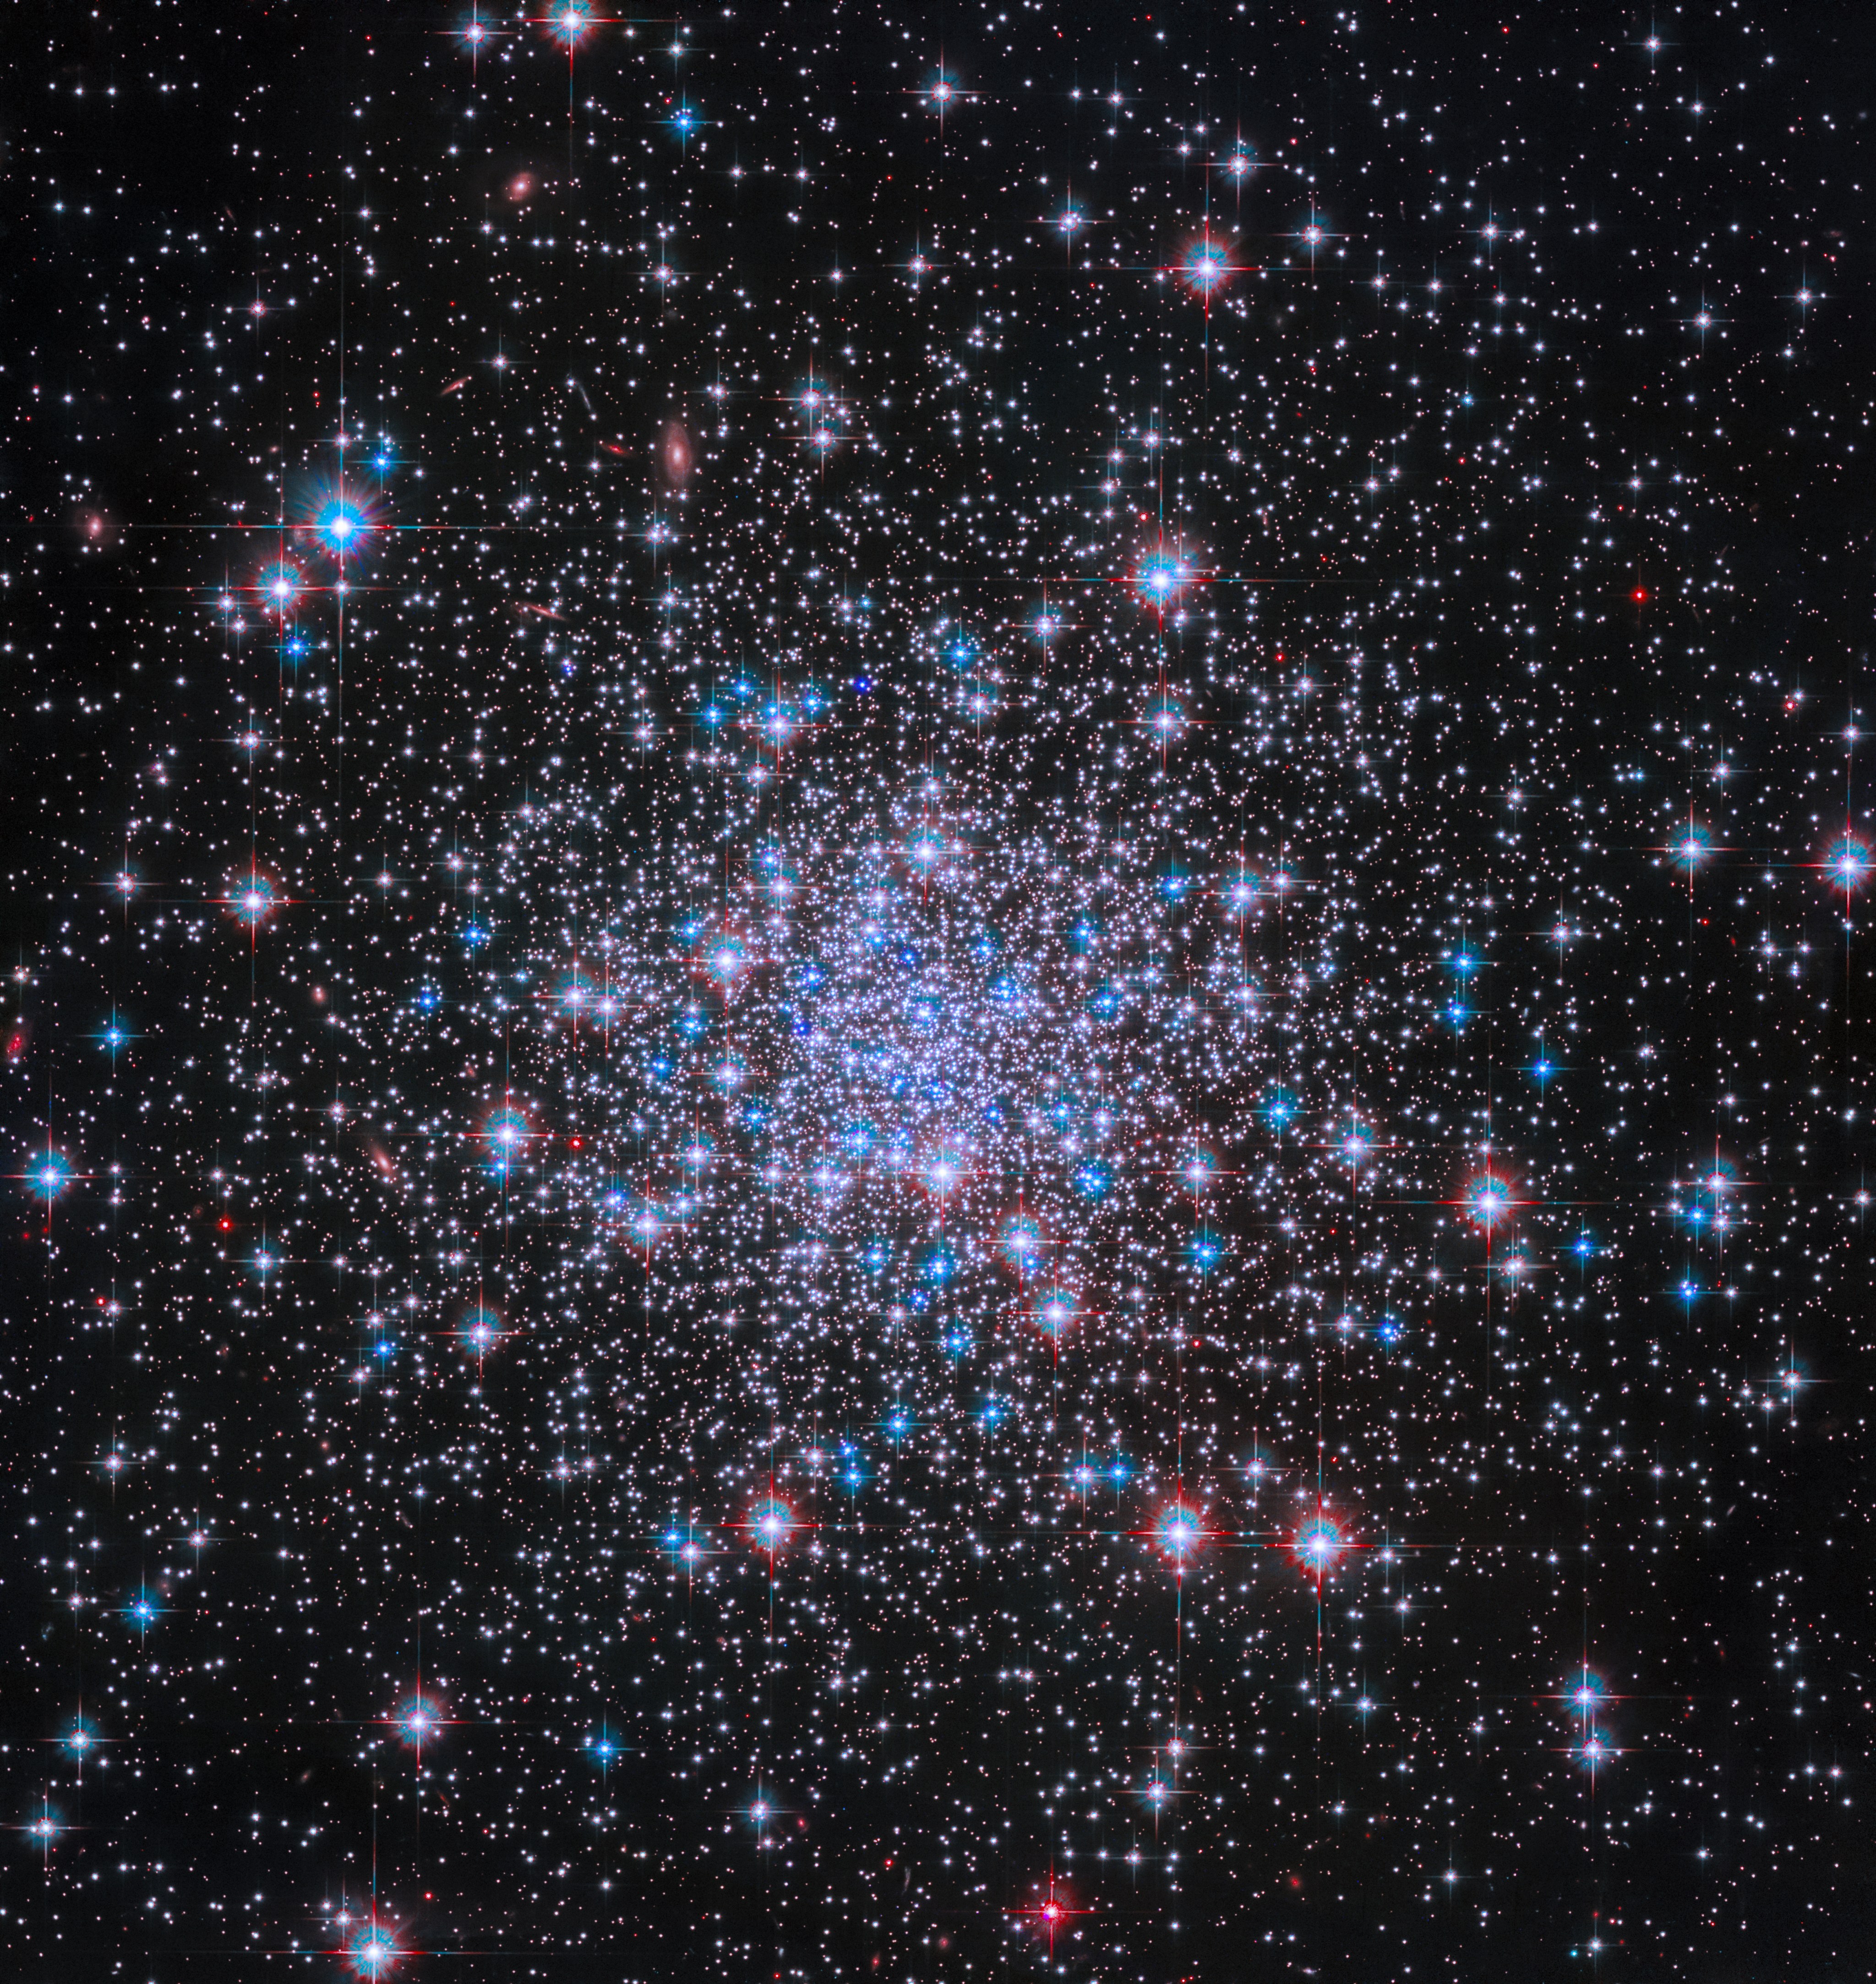 Thousands of bright stars shine against black space, more tightly condensed near the image’s center. The stars glint in shades of white, blue, and red, and diffraction spikes are visible around the foreground stars.